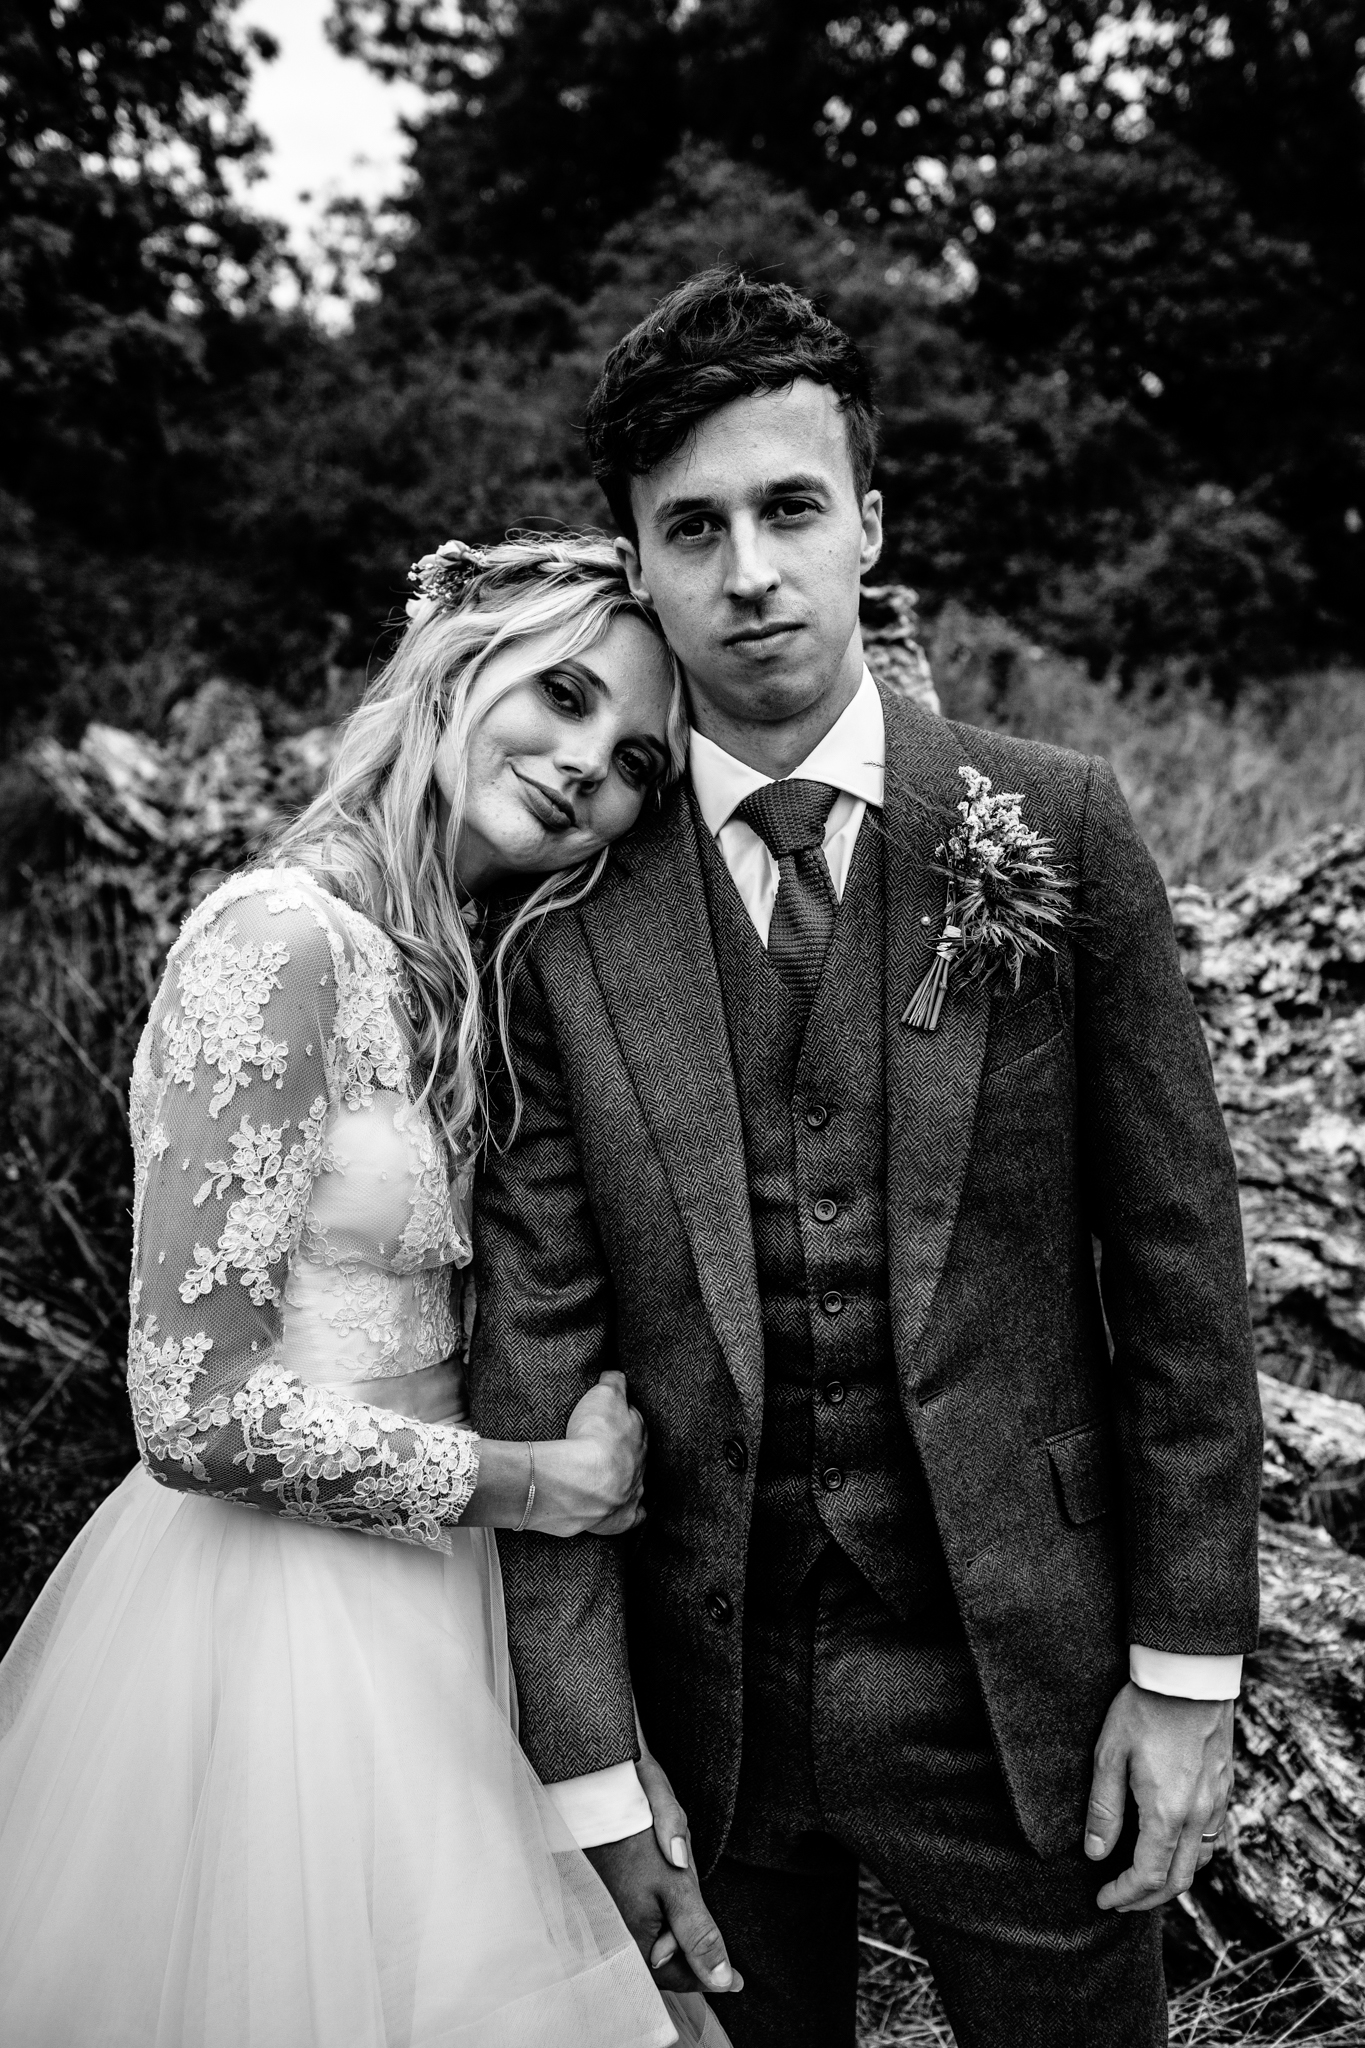 bride in lace Emma Tindley separate top and groom in navy blue and red tie three piece suit snuggled together for couple portrait at wedding in Mells walled garden